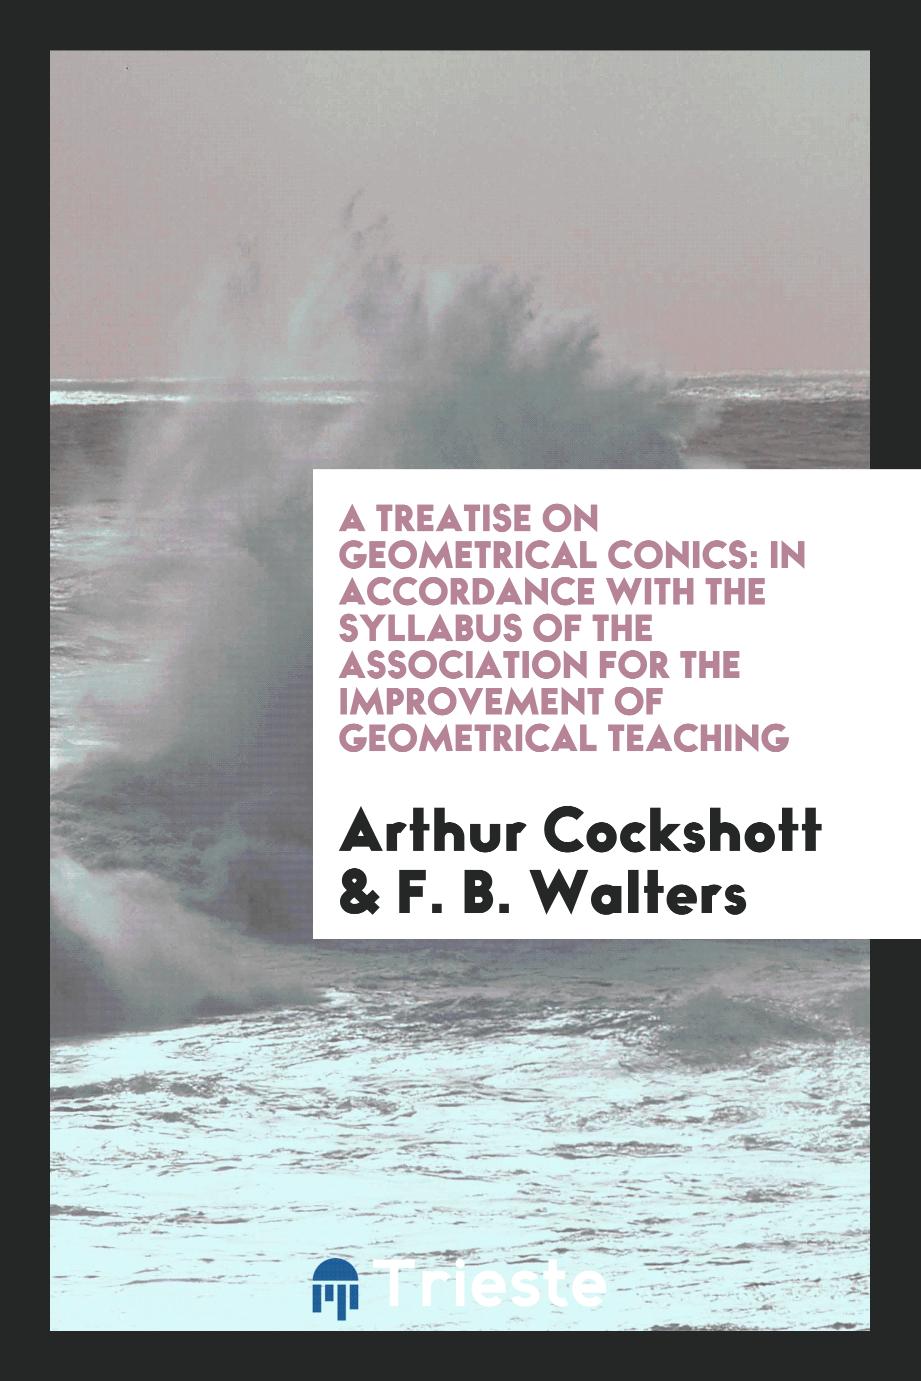 A Treatise on Geometrical Conics: In Accordance with the Syllabus of the Association for the Improvement of Geometrical Teaching